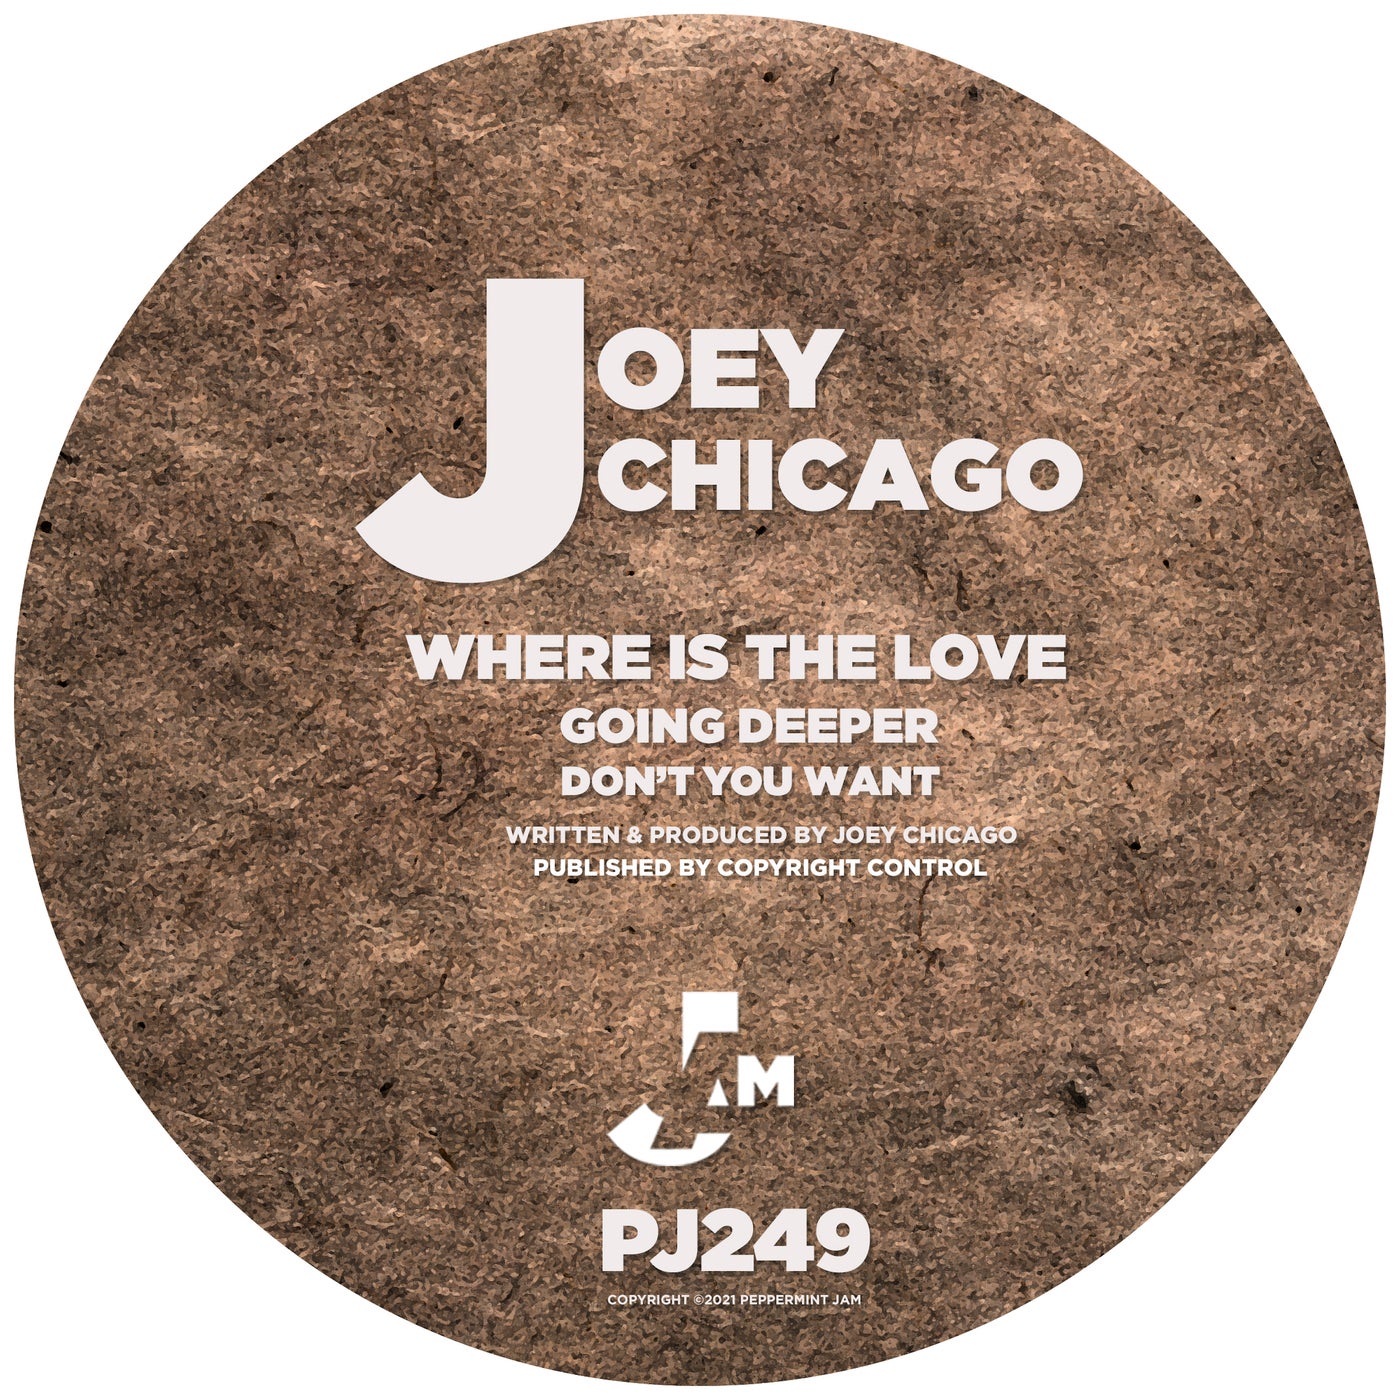 Joey Chicago – Where Is the Love [PJMS 0249]